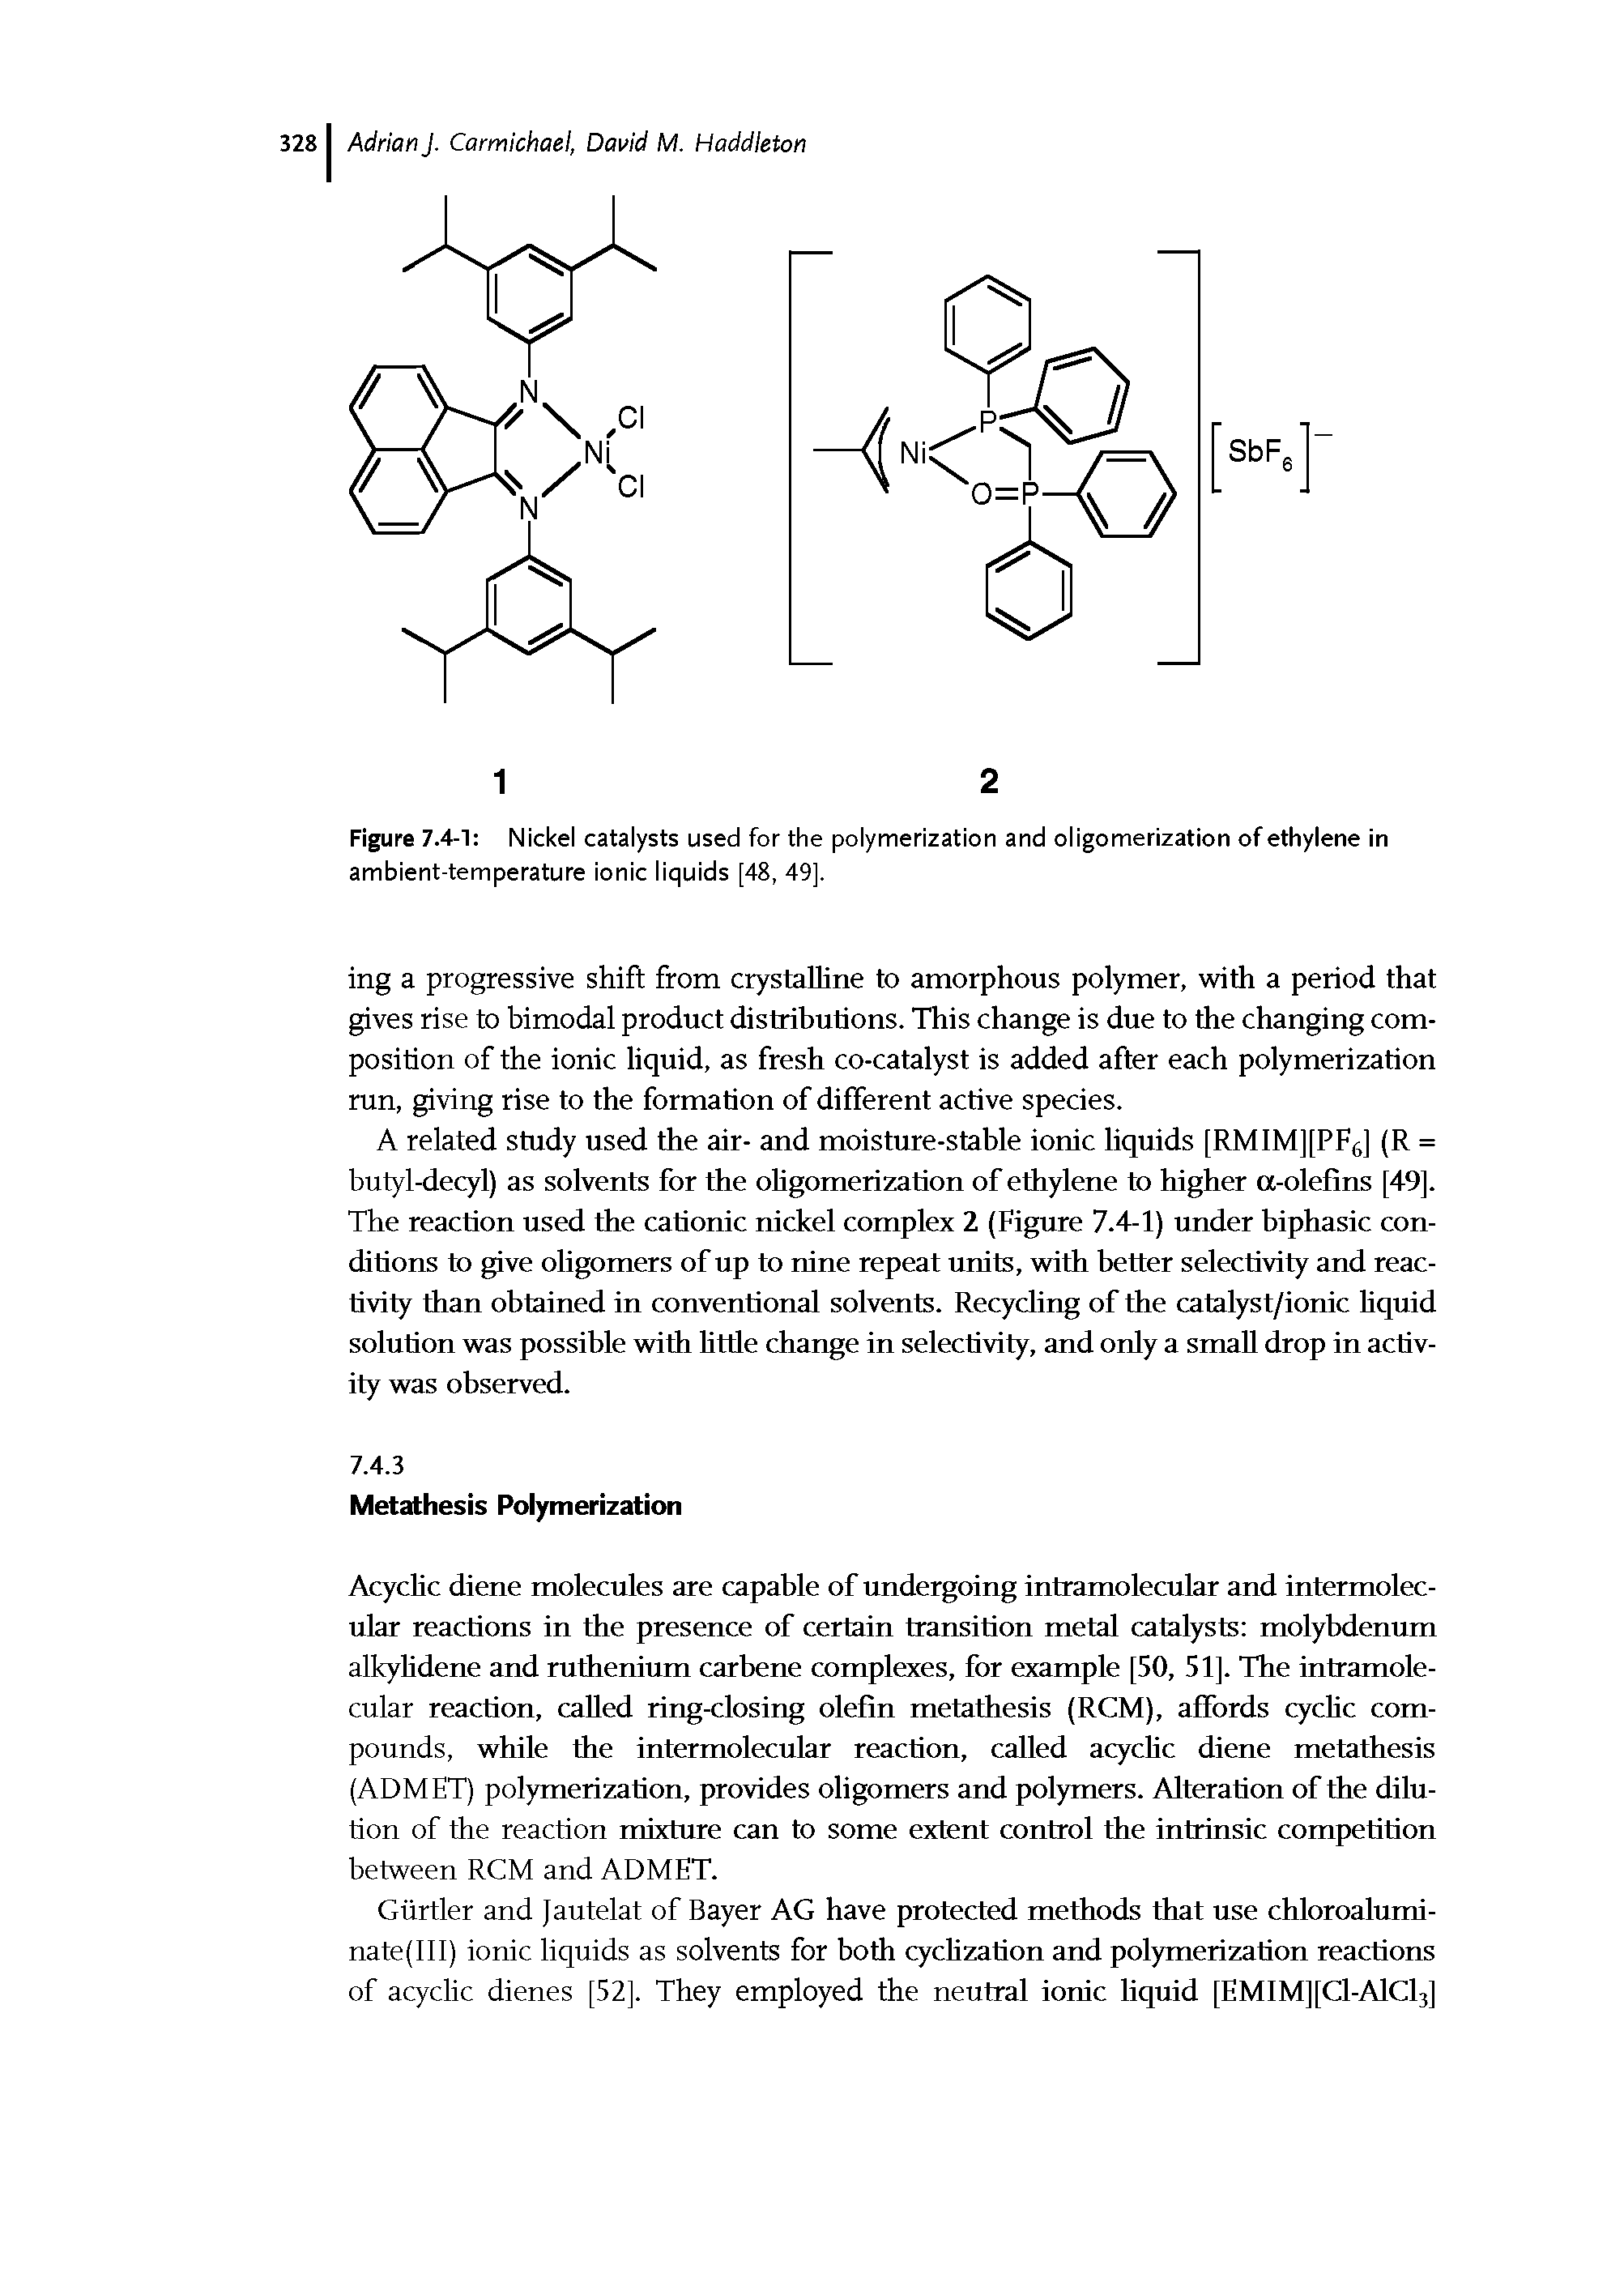 Figure 7.4-1 Nickel catalysts used for the polymerization and oligomerization of ethyiene in ambient-temperature ionic liquids [48, 49].